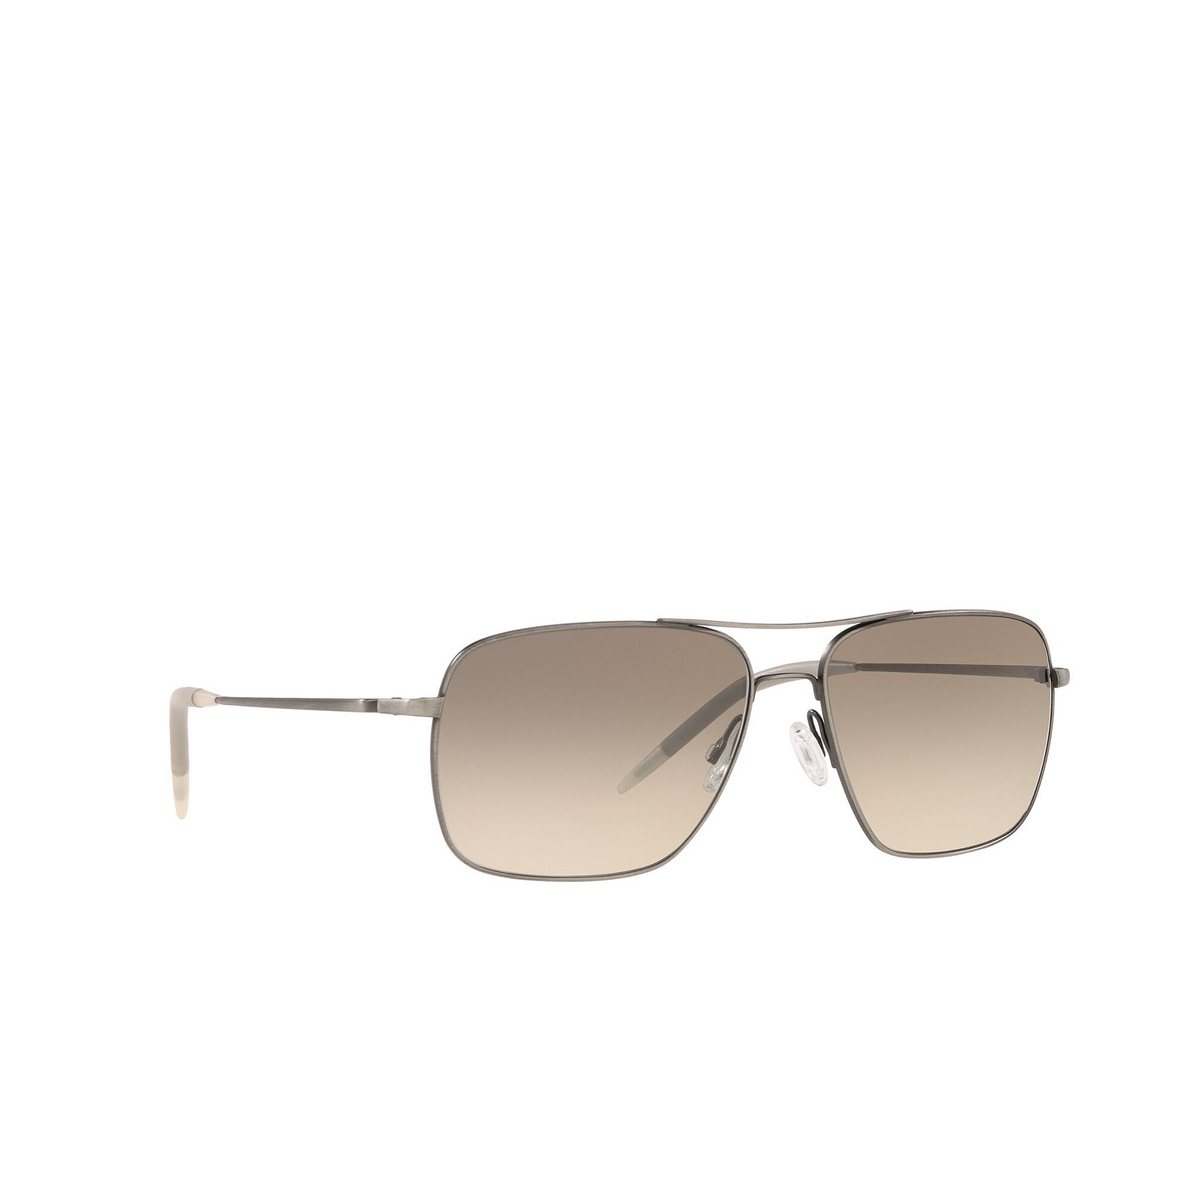 Oliver Peoples® Rectangle Sunglasses: Clifton OV1150S color Antique Pewter 528932 - three-quarters view.